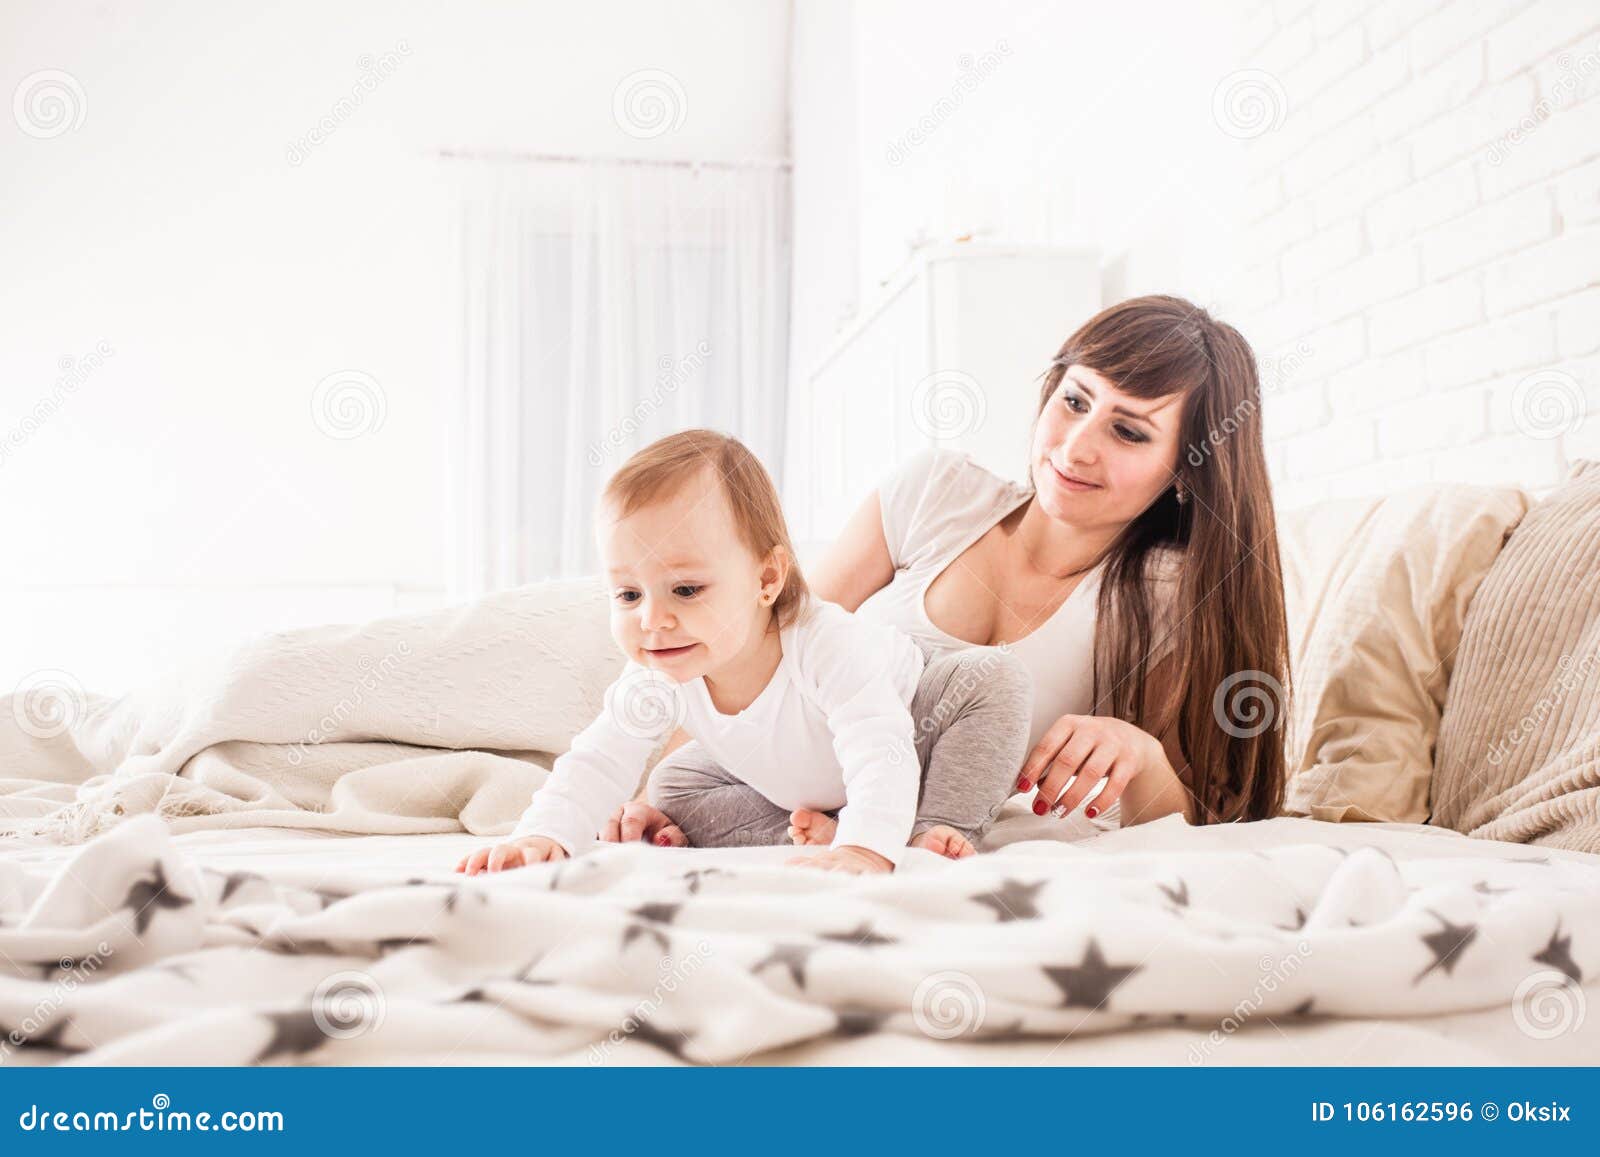 Happy family in room stock photo. Image of educate, attachment - 106162596